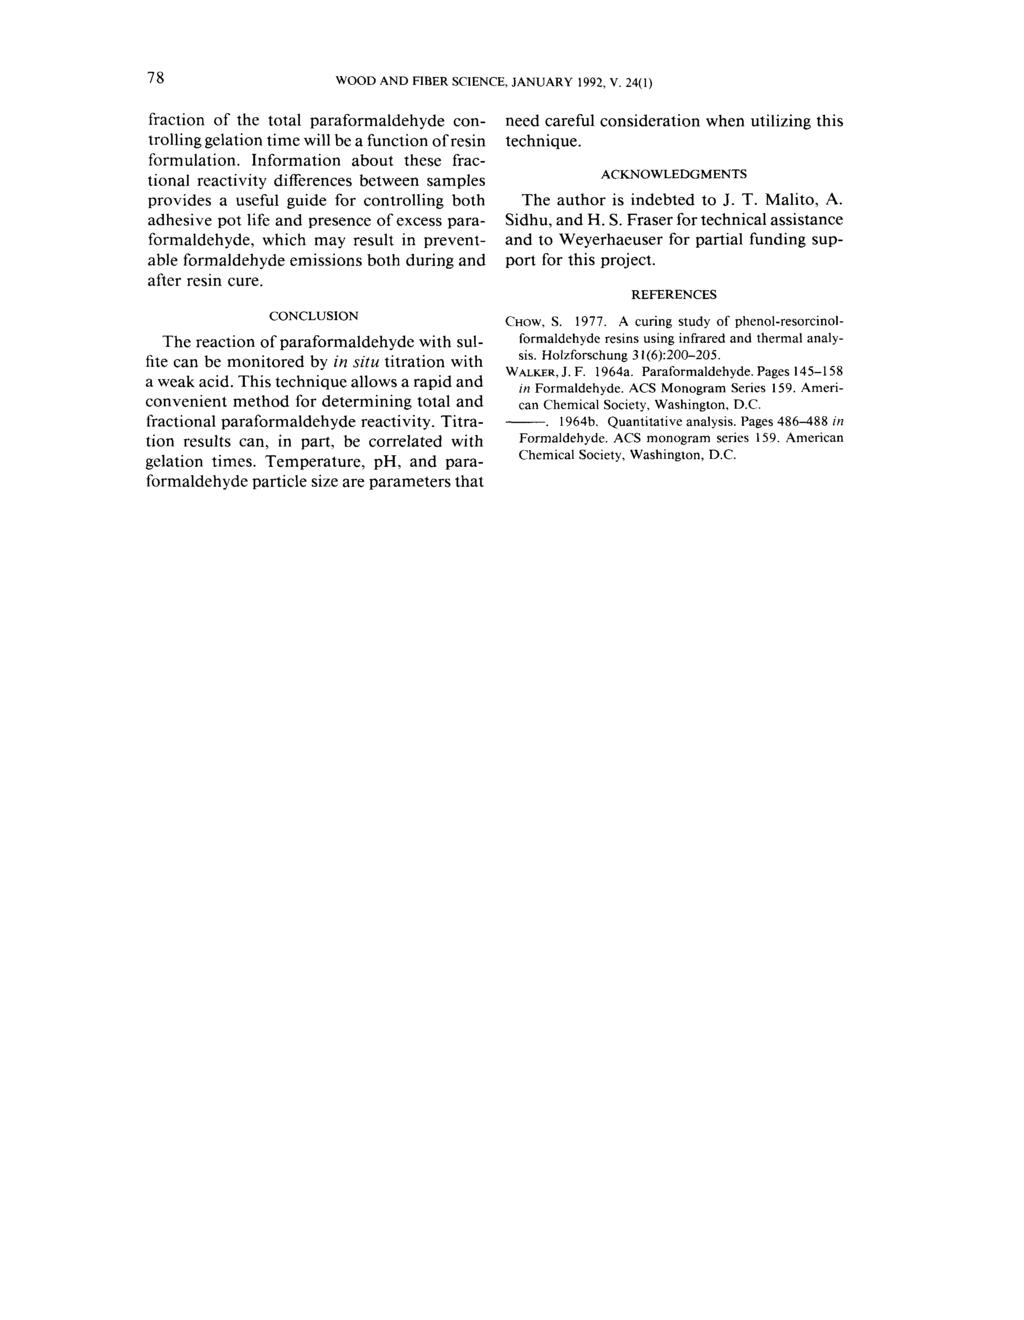 78 WOOD AND FIBER SCIENCE, JANUARY 1992, V. 24(1) fraction of the total paraformaldehyde controlling gelation time will be a function of resin formulation.